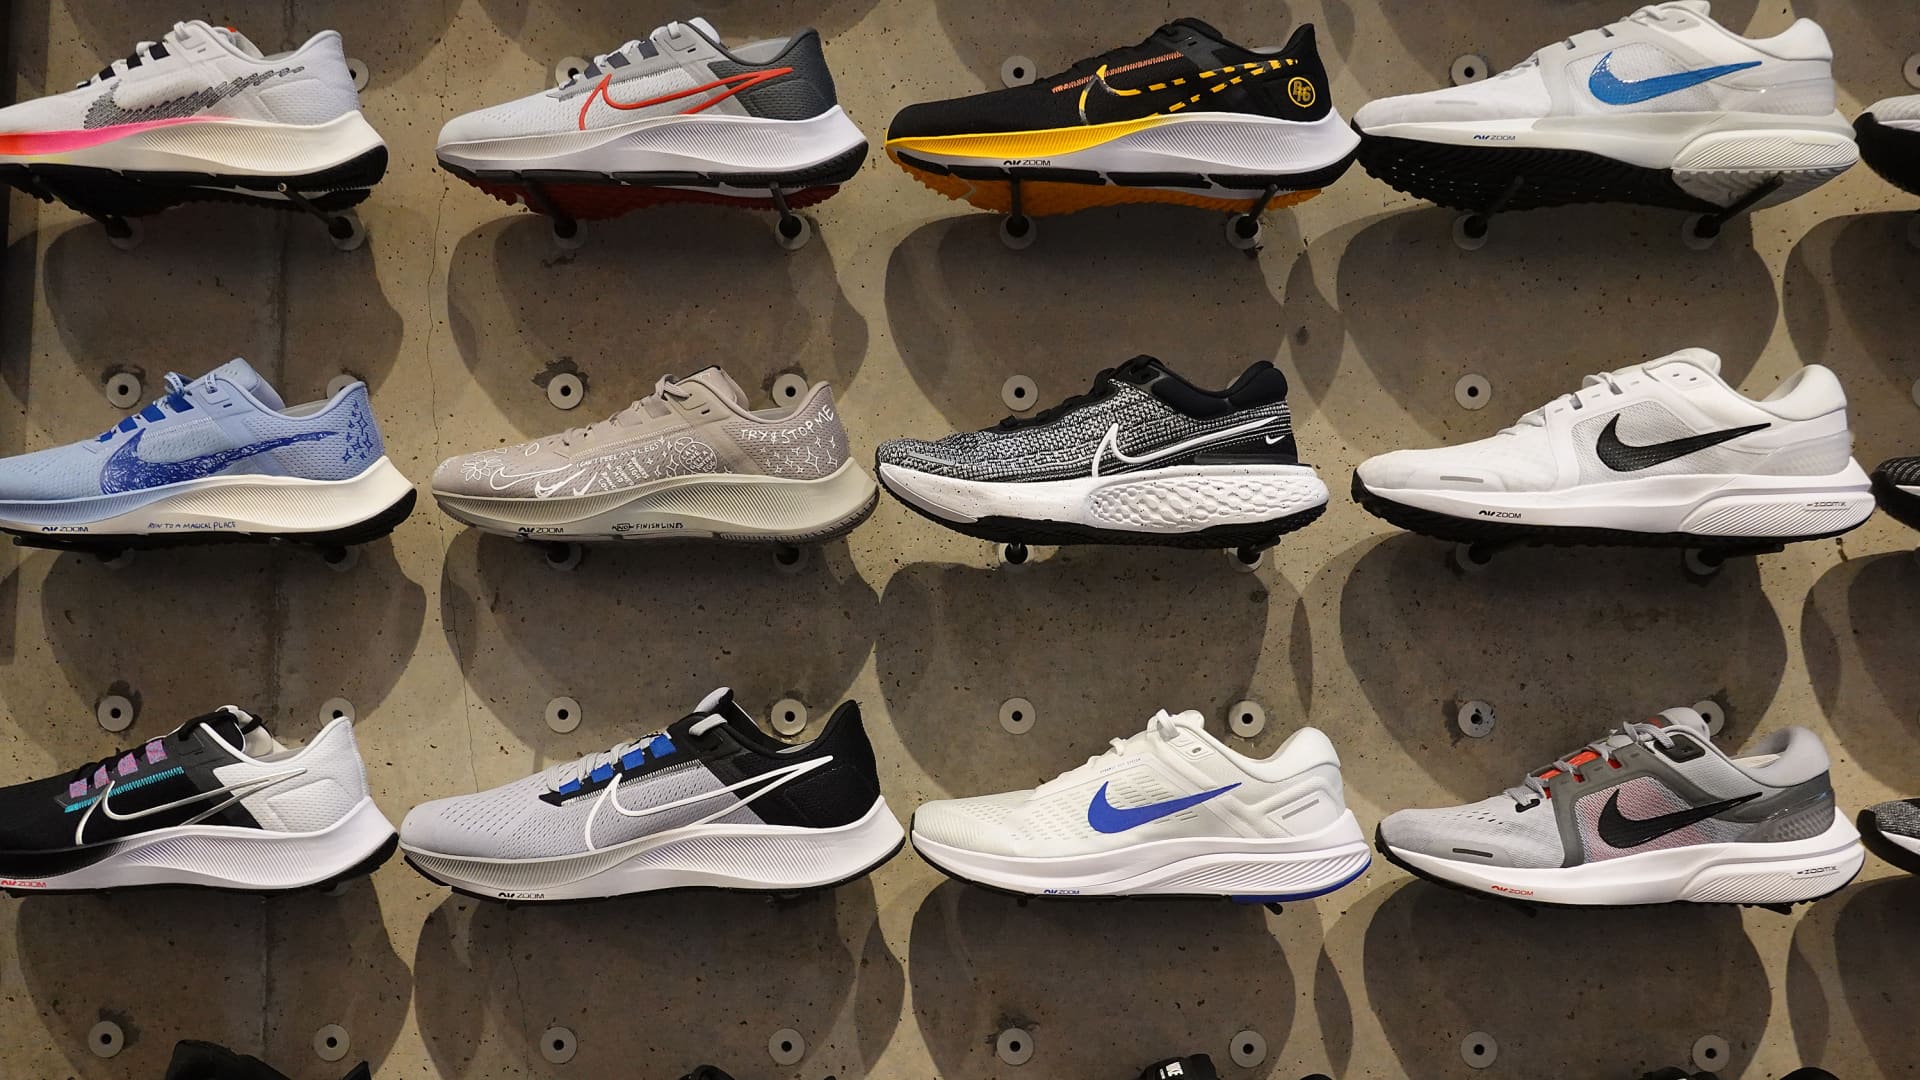 Wall Street is on watch for Nike comments on China, Russia and supply chain woes